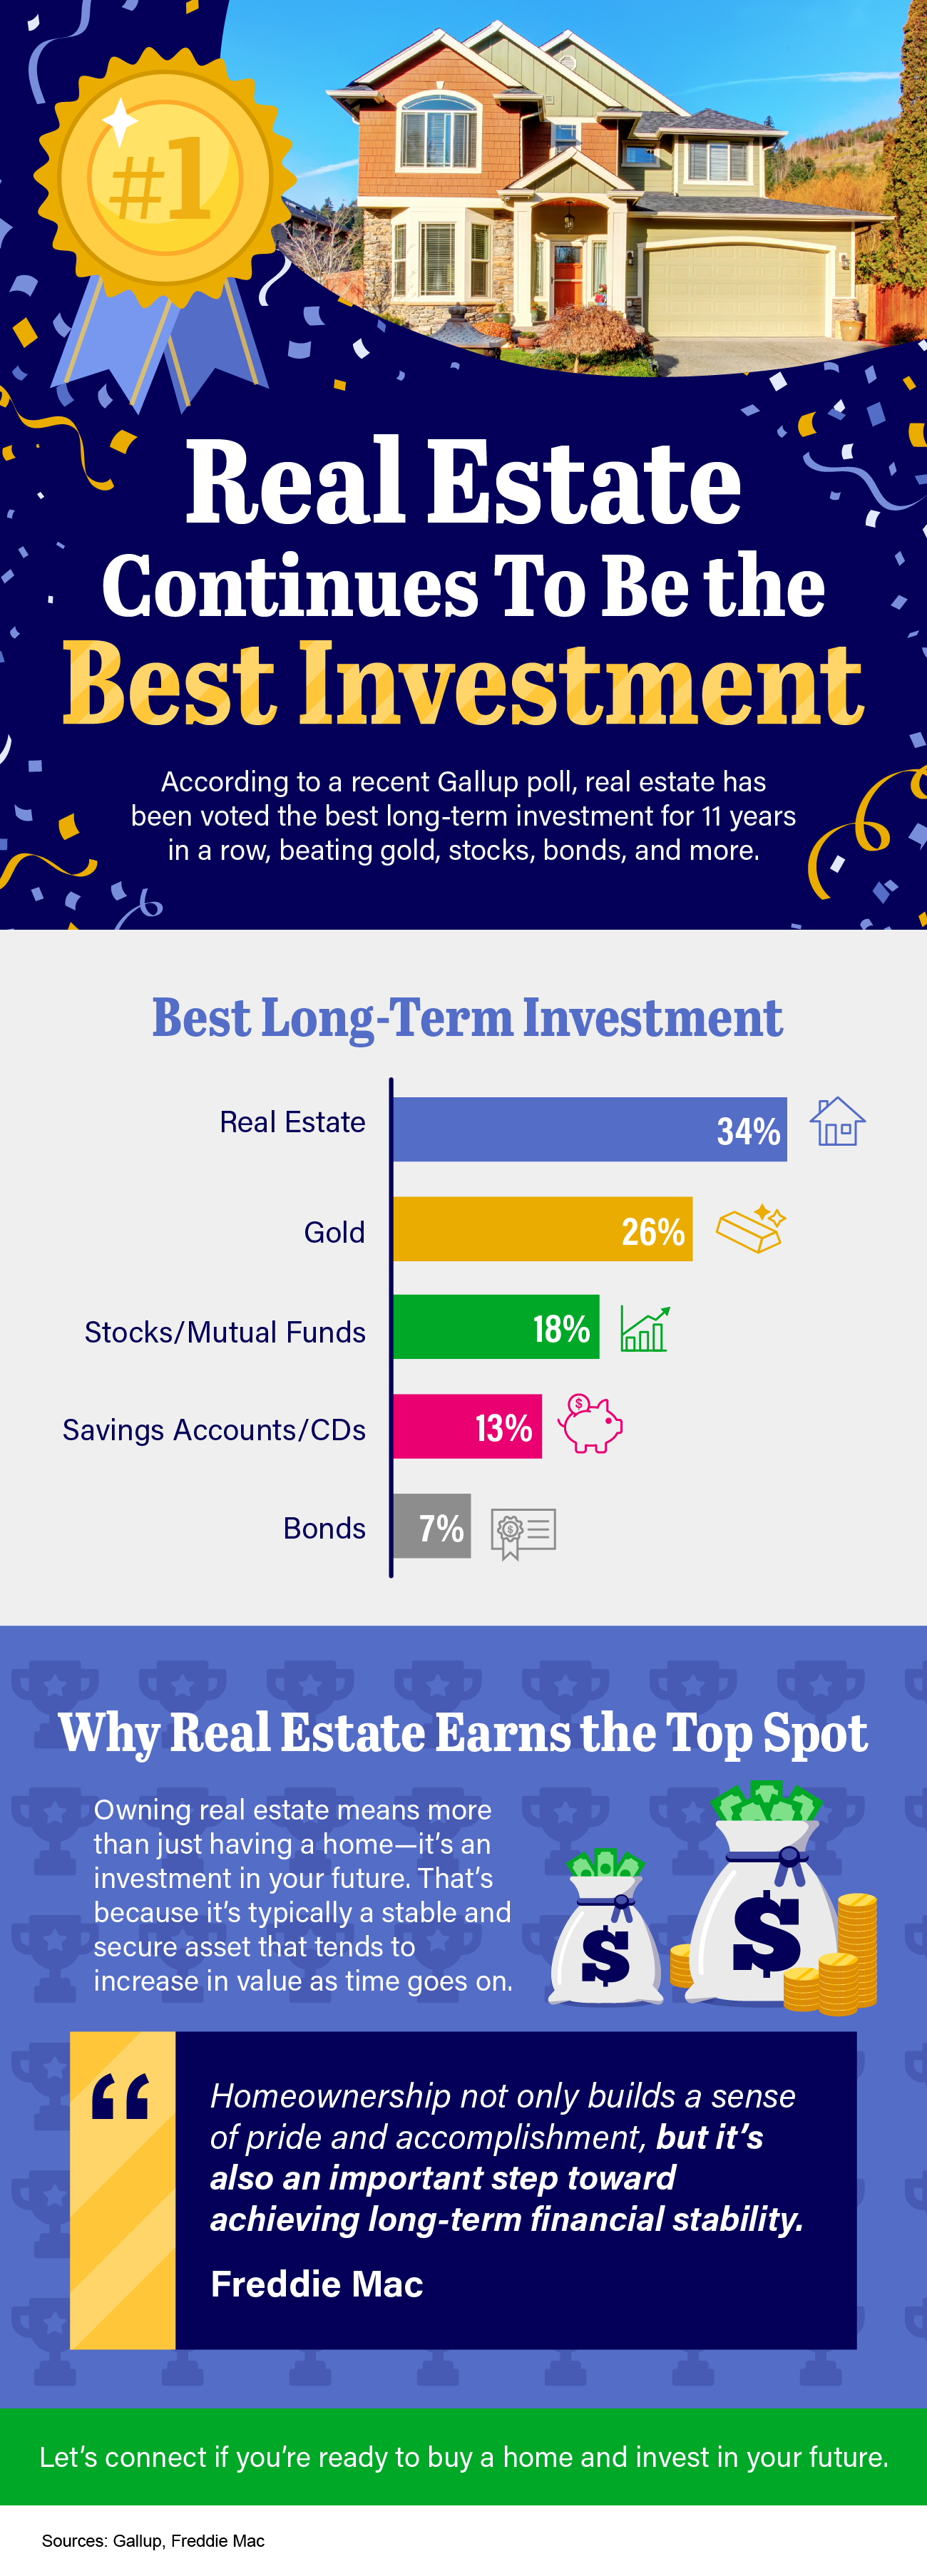 Real Estate Continues To Be the Best Investment [INFOGRAPHIC]